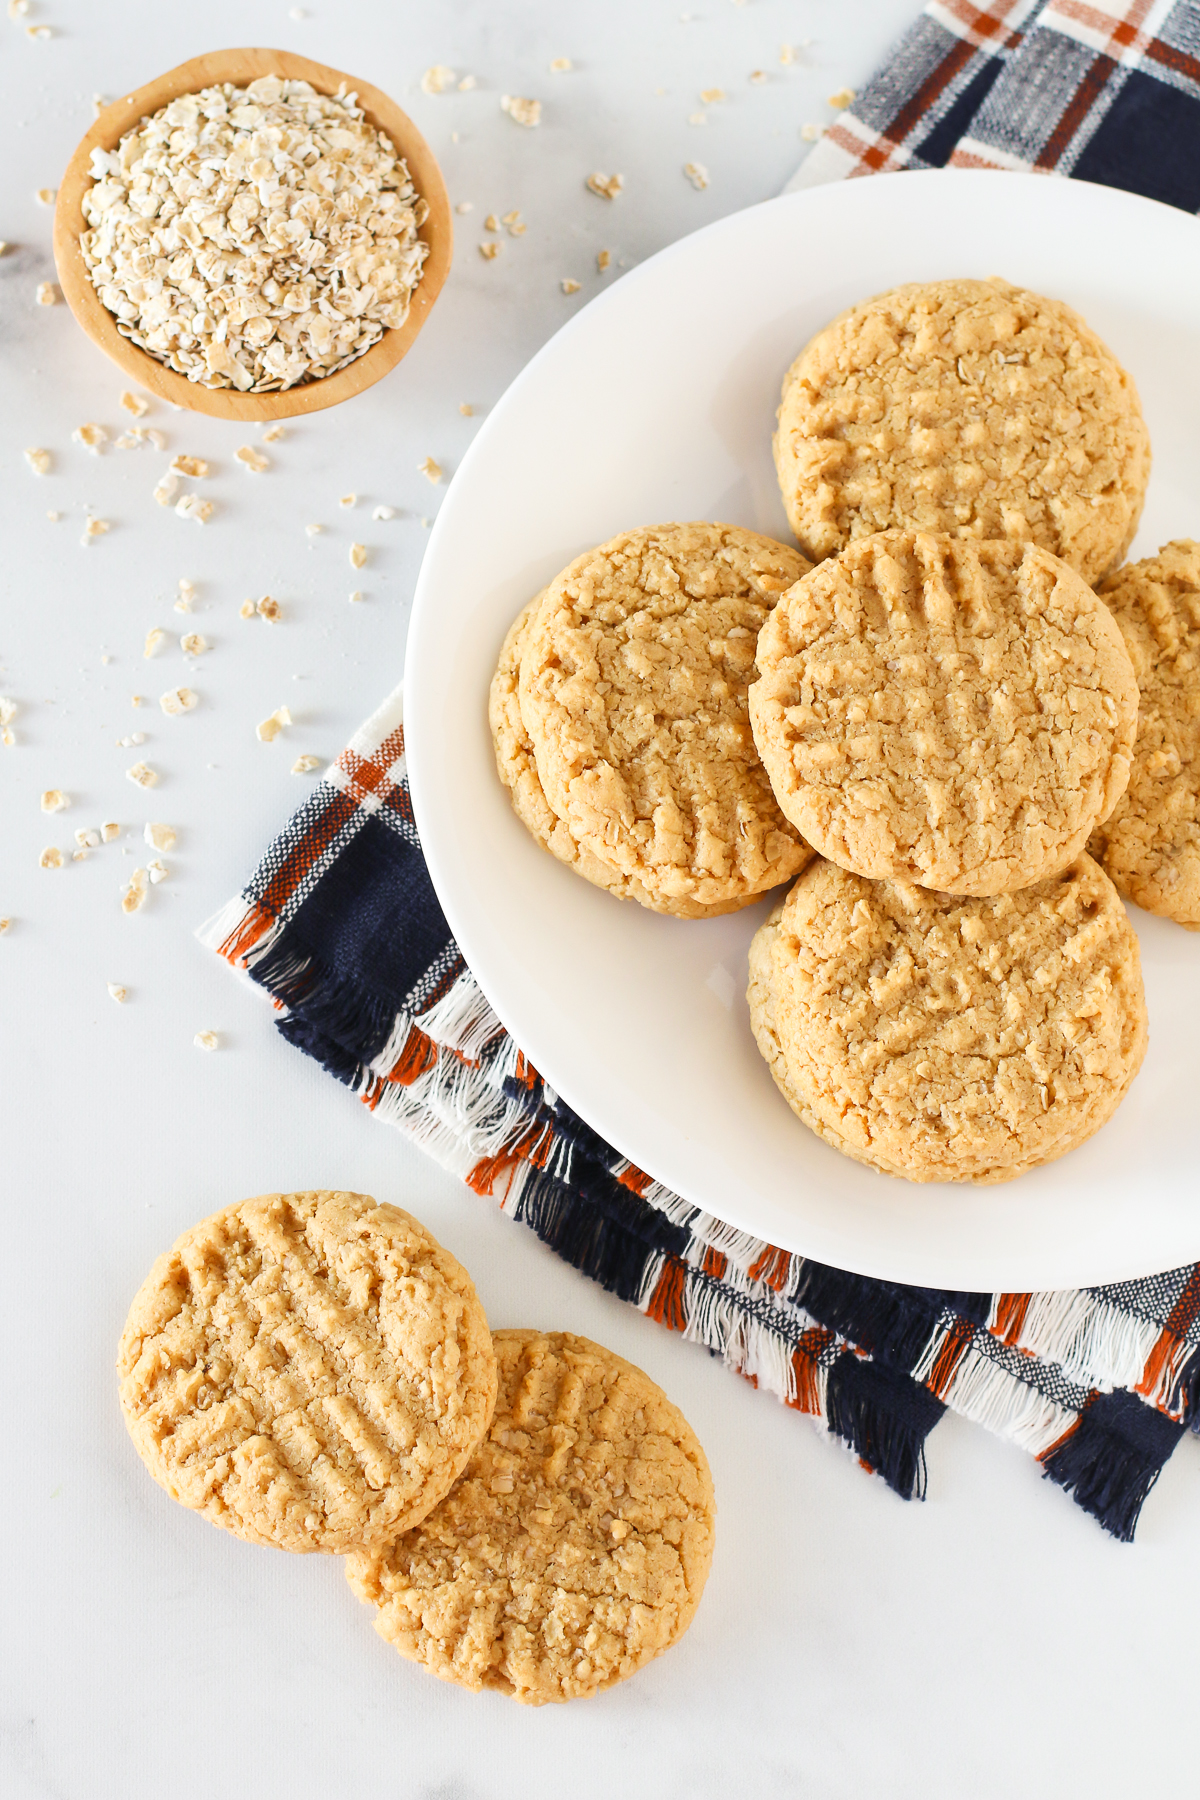 Gluten Free Vegan Peanut Butter Oatmeal Cookies. Chewy, soft and just the perfect peanut butter cookie!